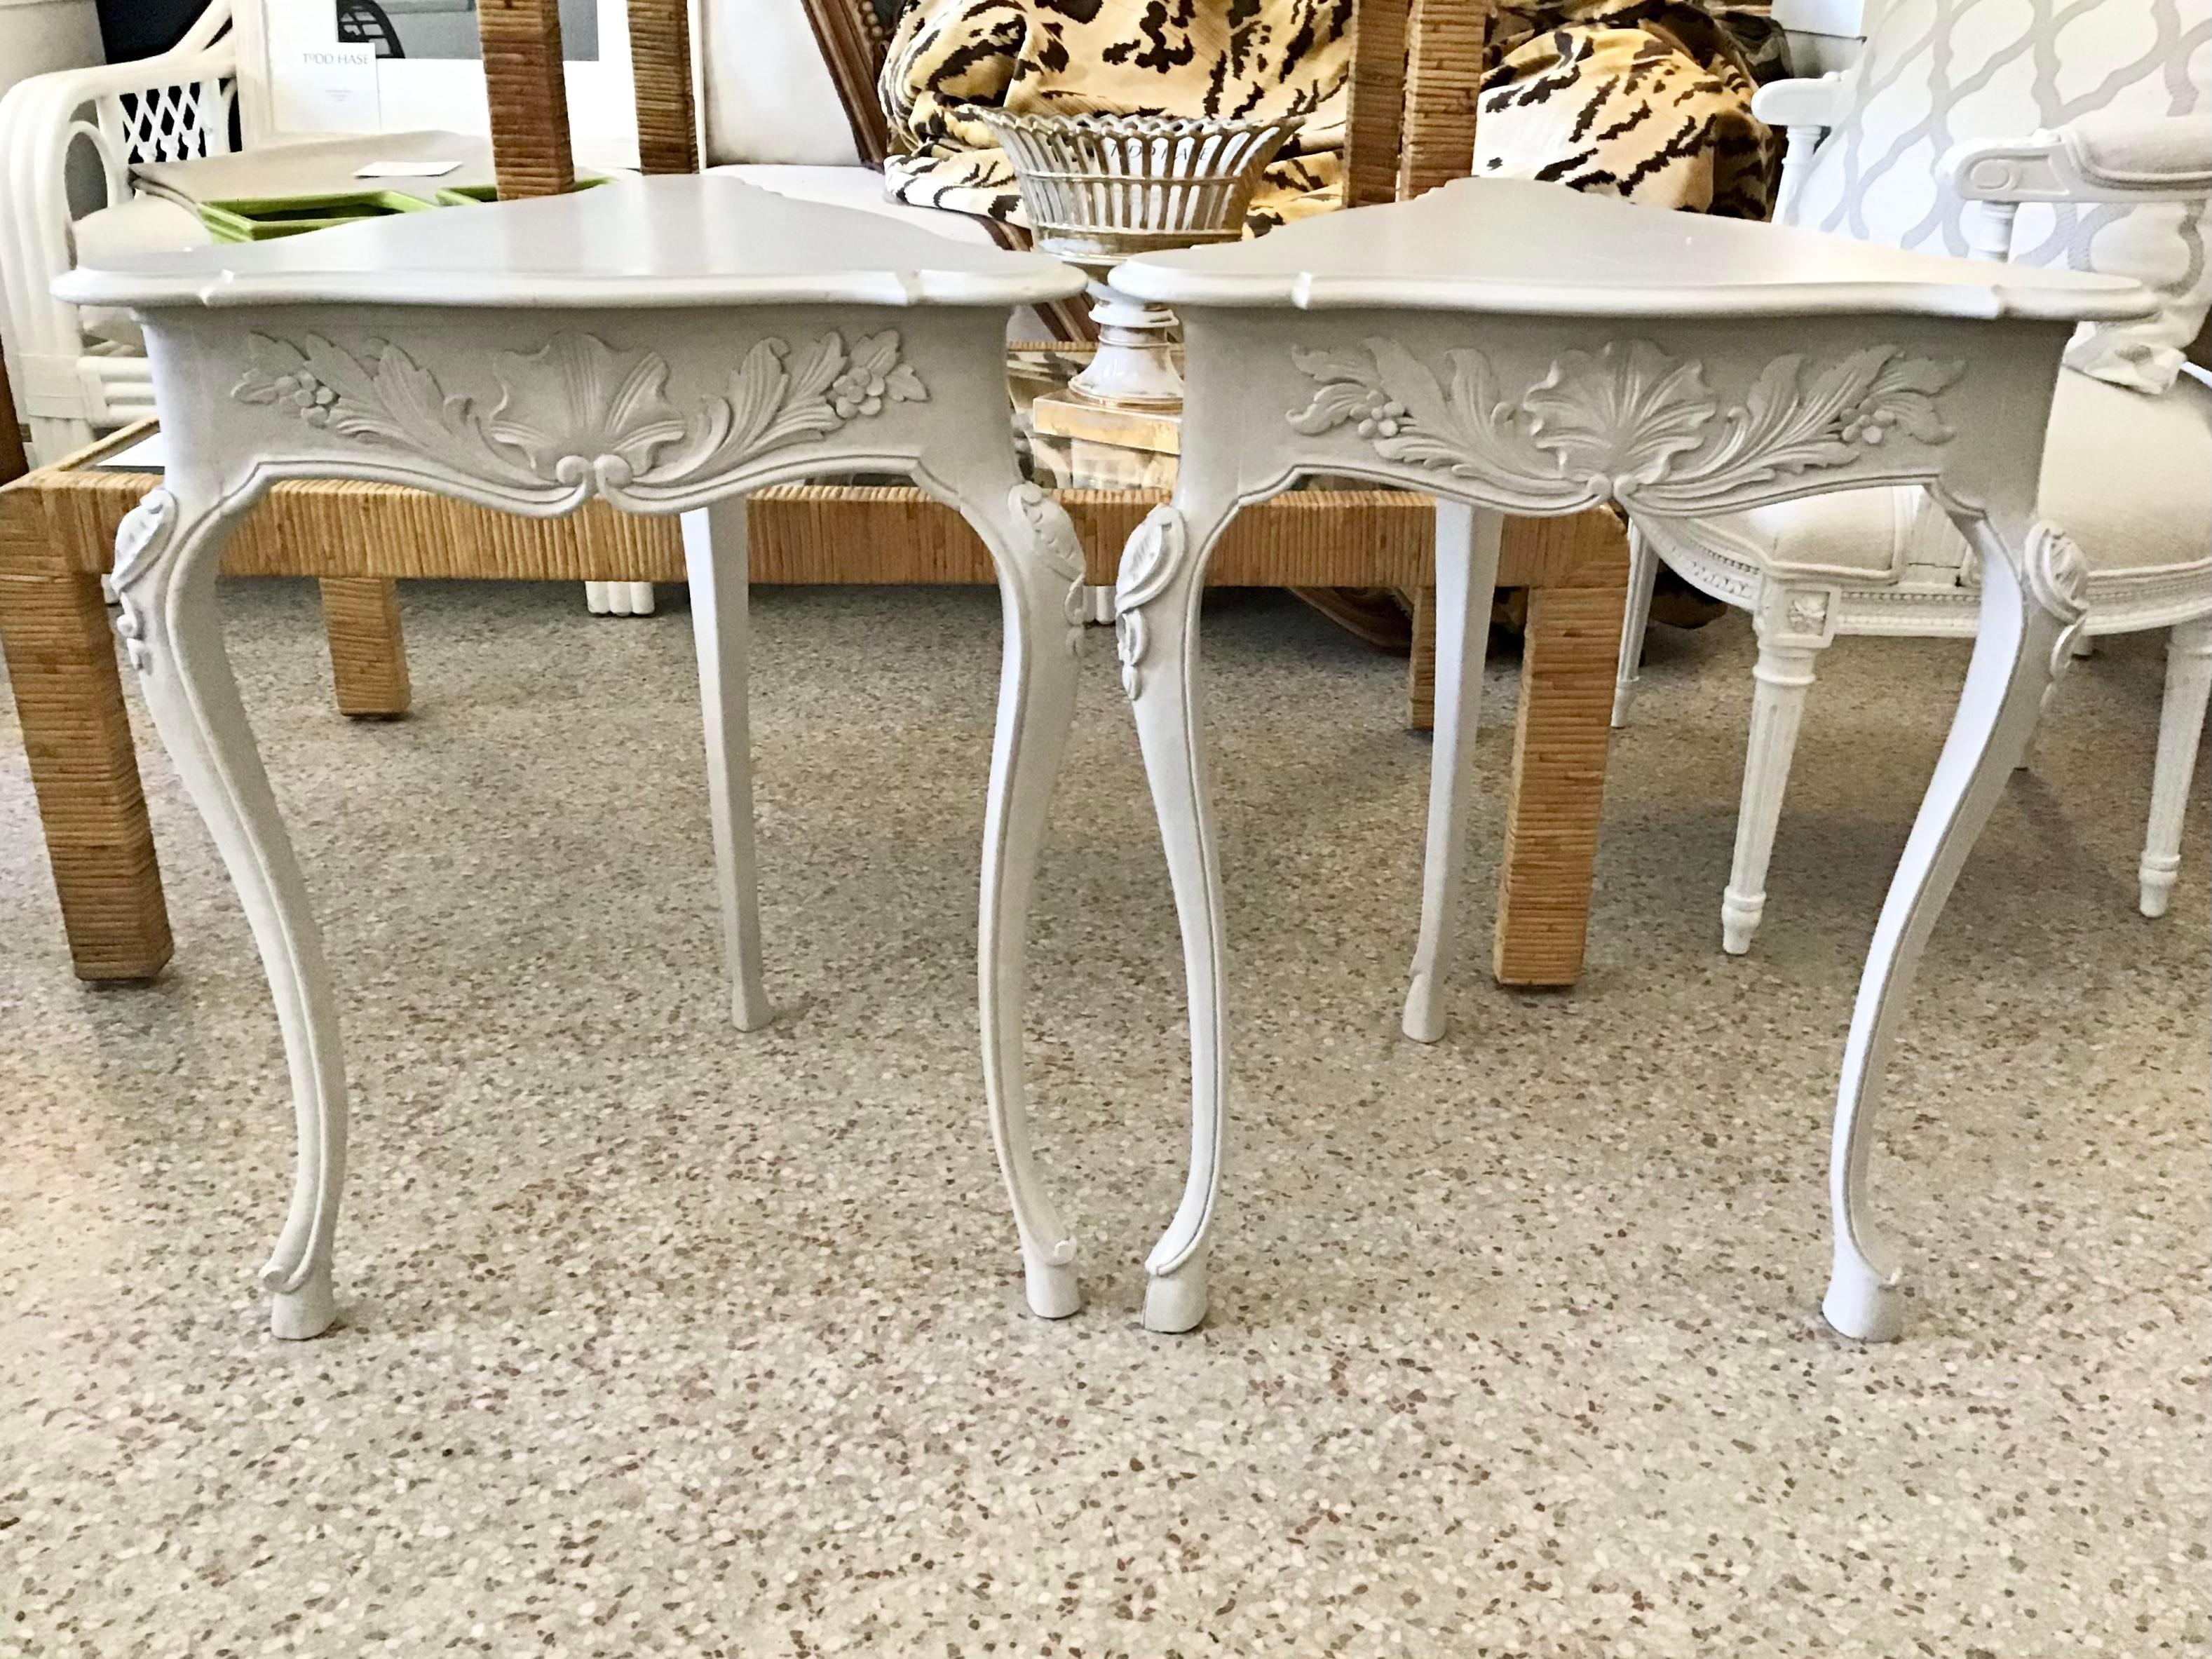 Very nice pair of French side tables with triangular top shape. Classic French carving details on the side and legs of the tables. New gray lacquer finish.